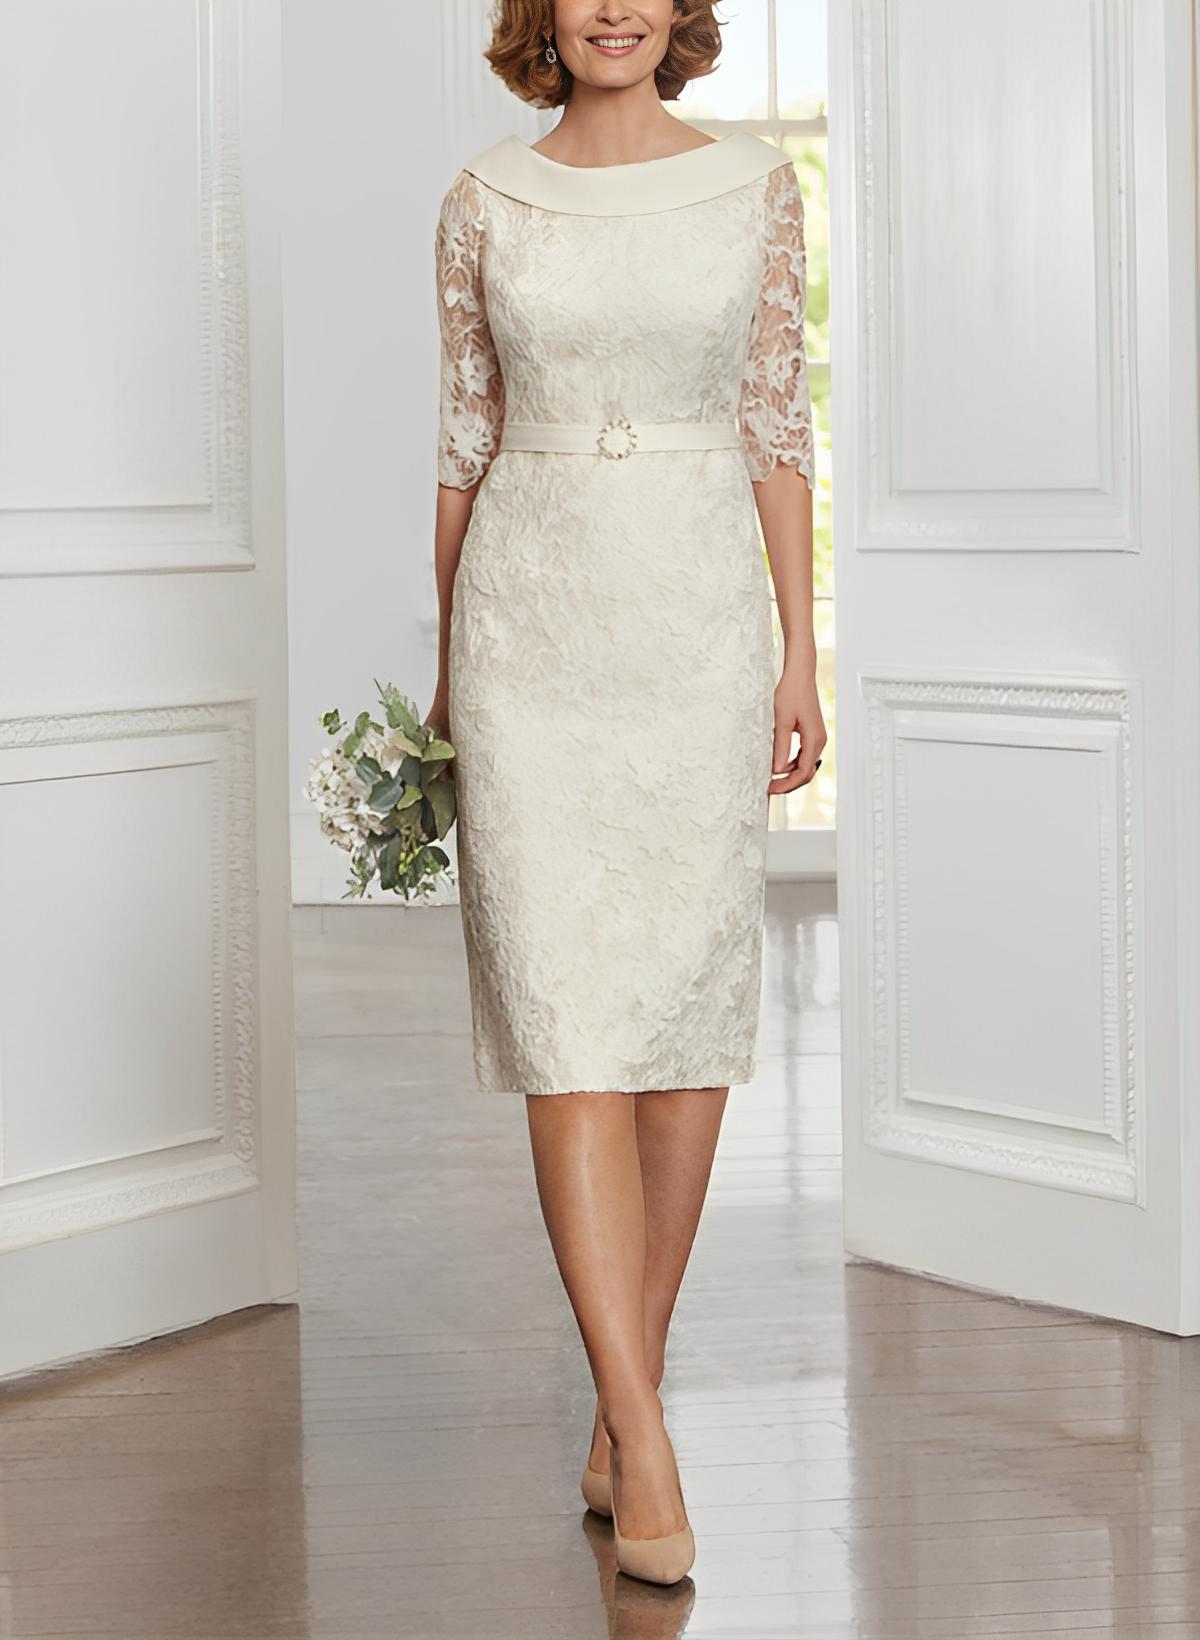 Sheath/Column Cowl Neck 1/2 Sleeves Lace Satin Knee-Length Mother Of The Bride Dresses With Beading